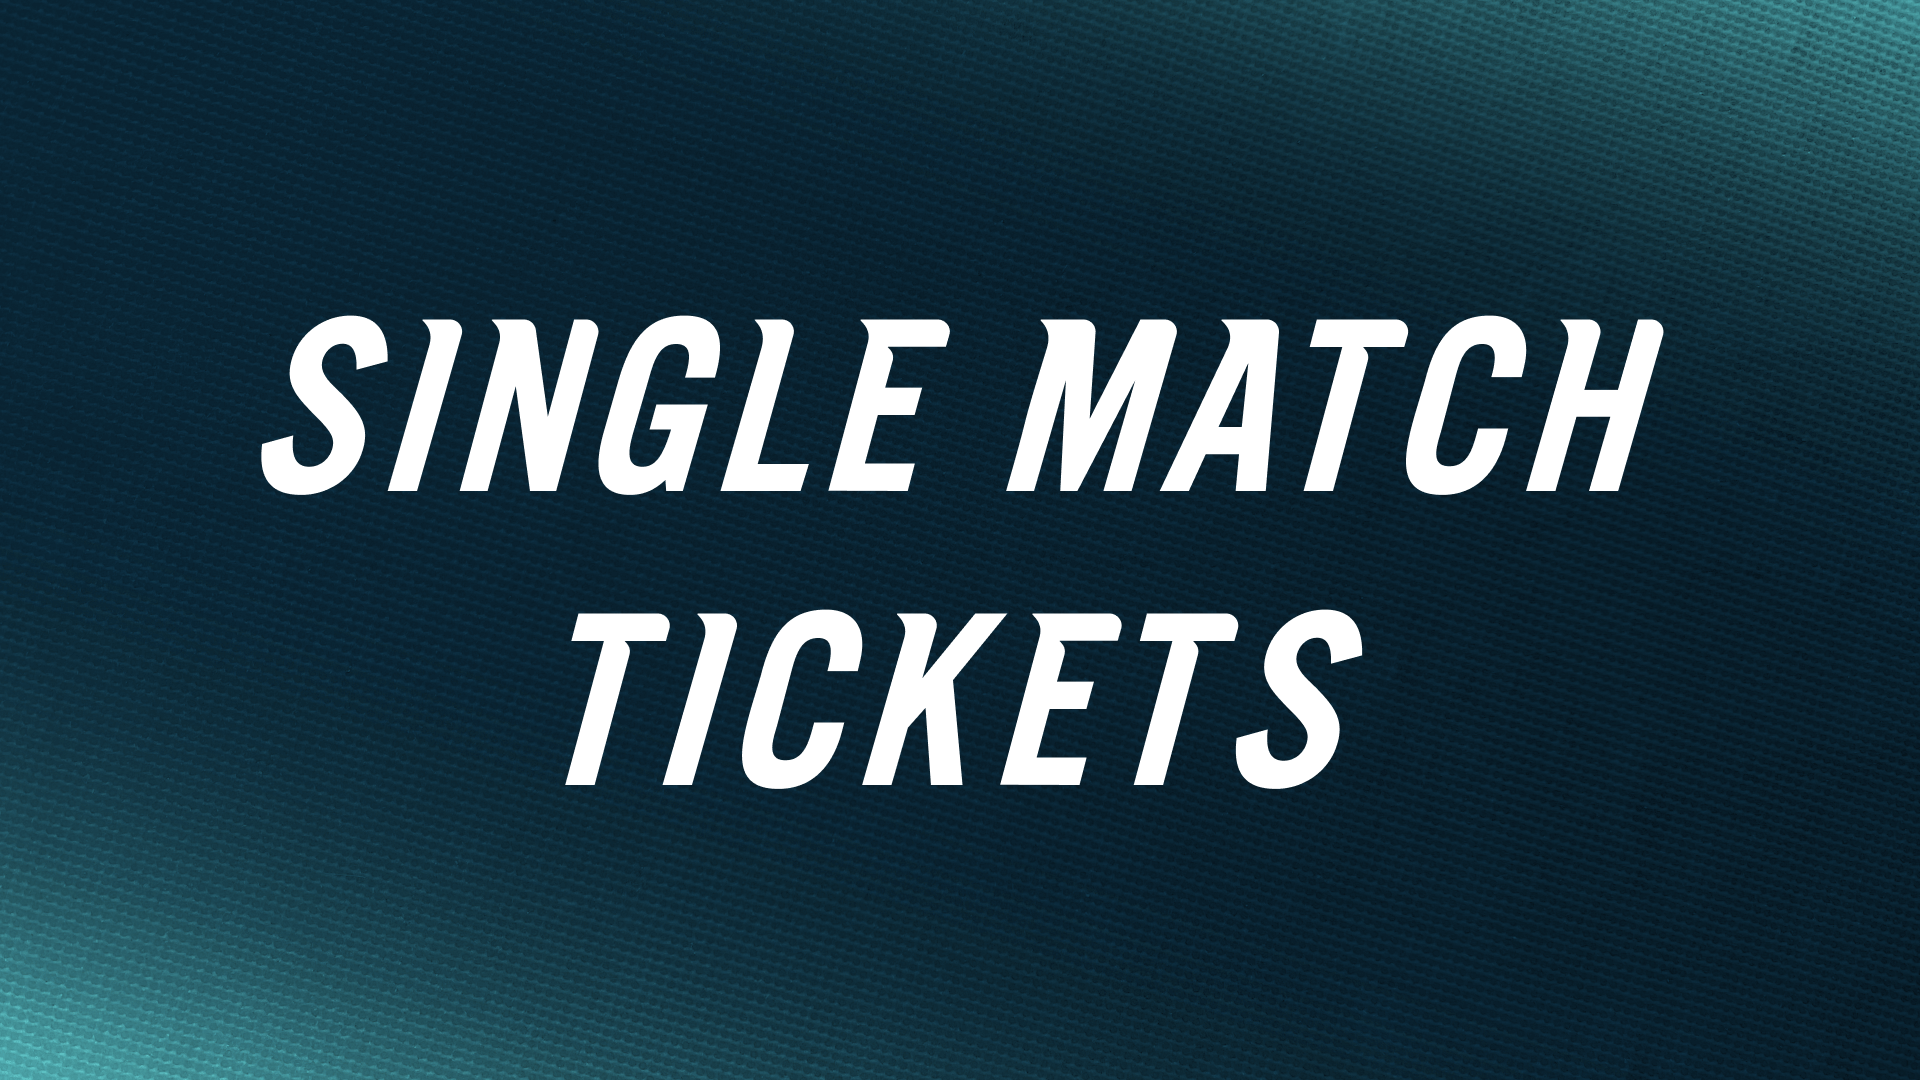 A graphic that says "Single Match Tickets"  and links to a page to purchase them.